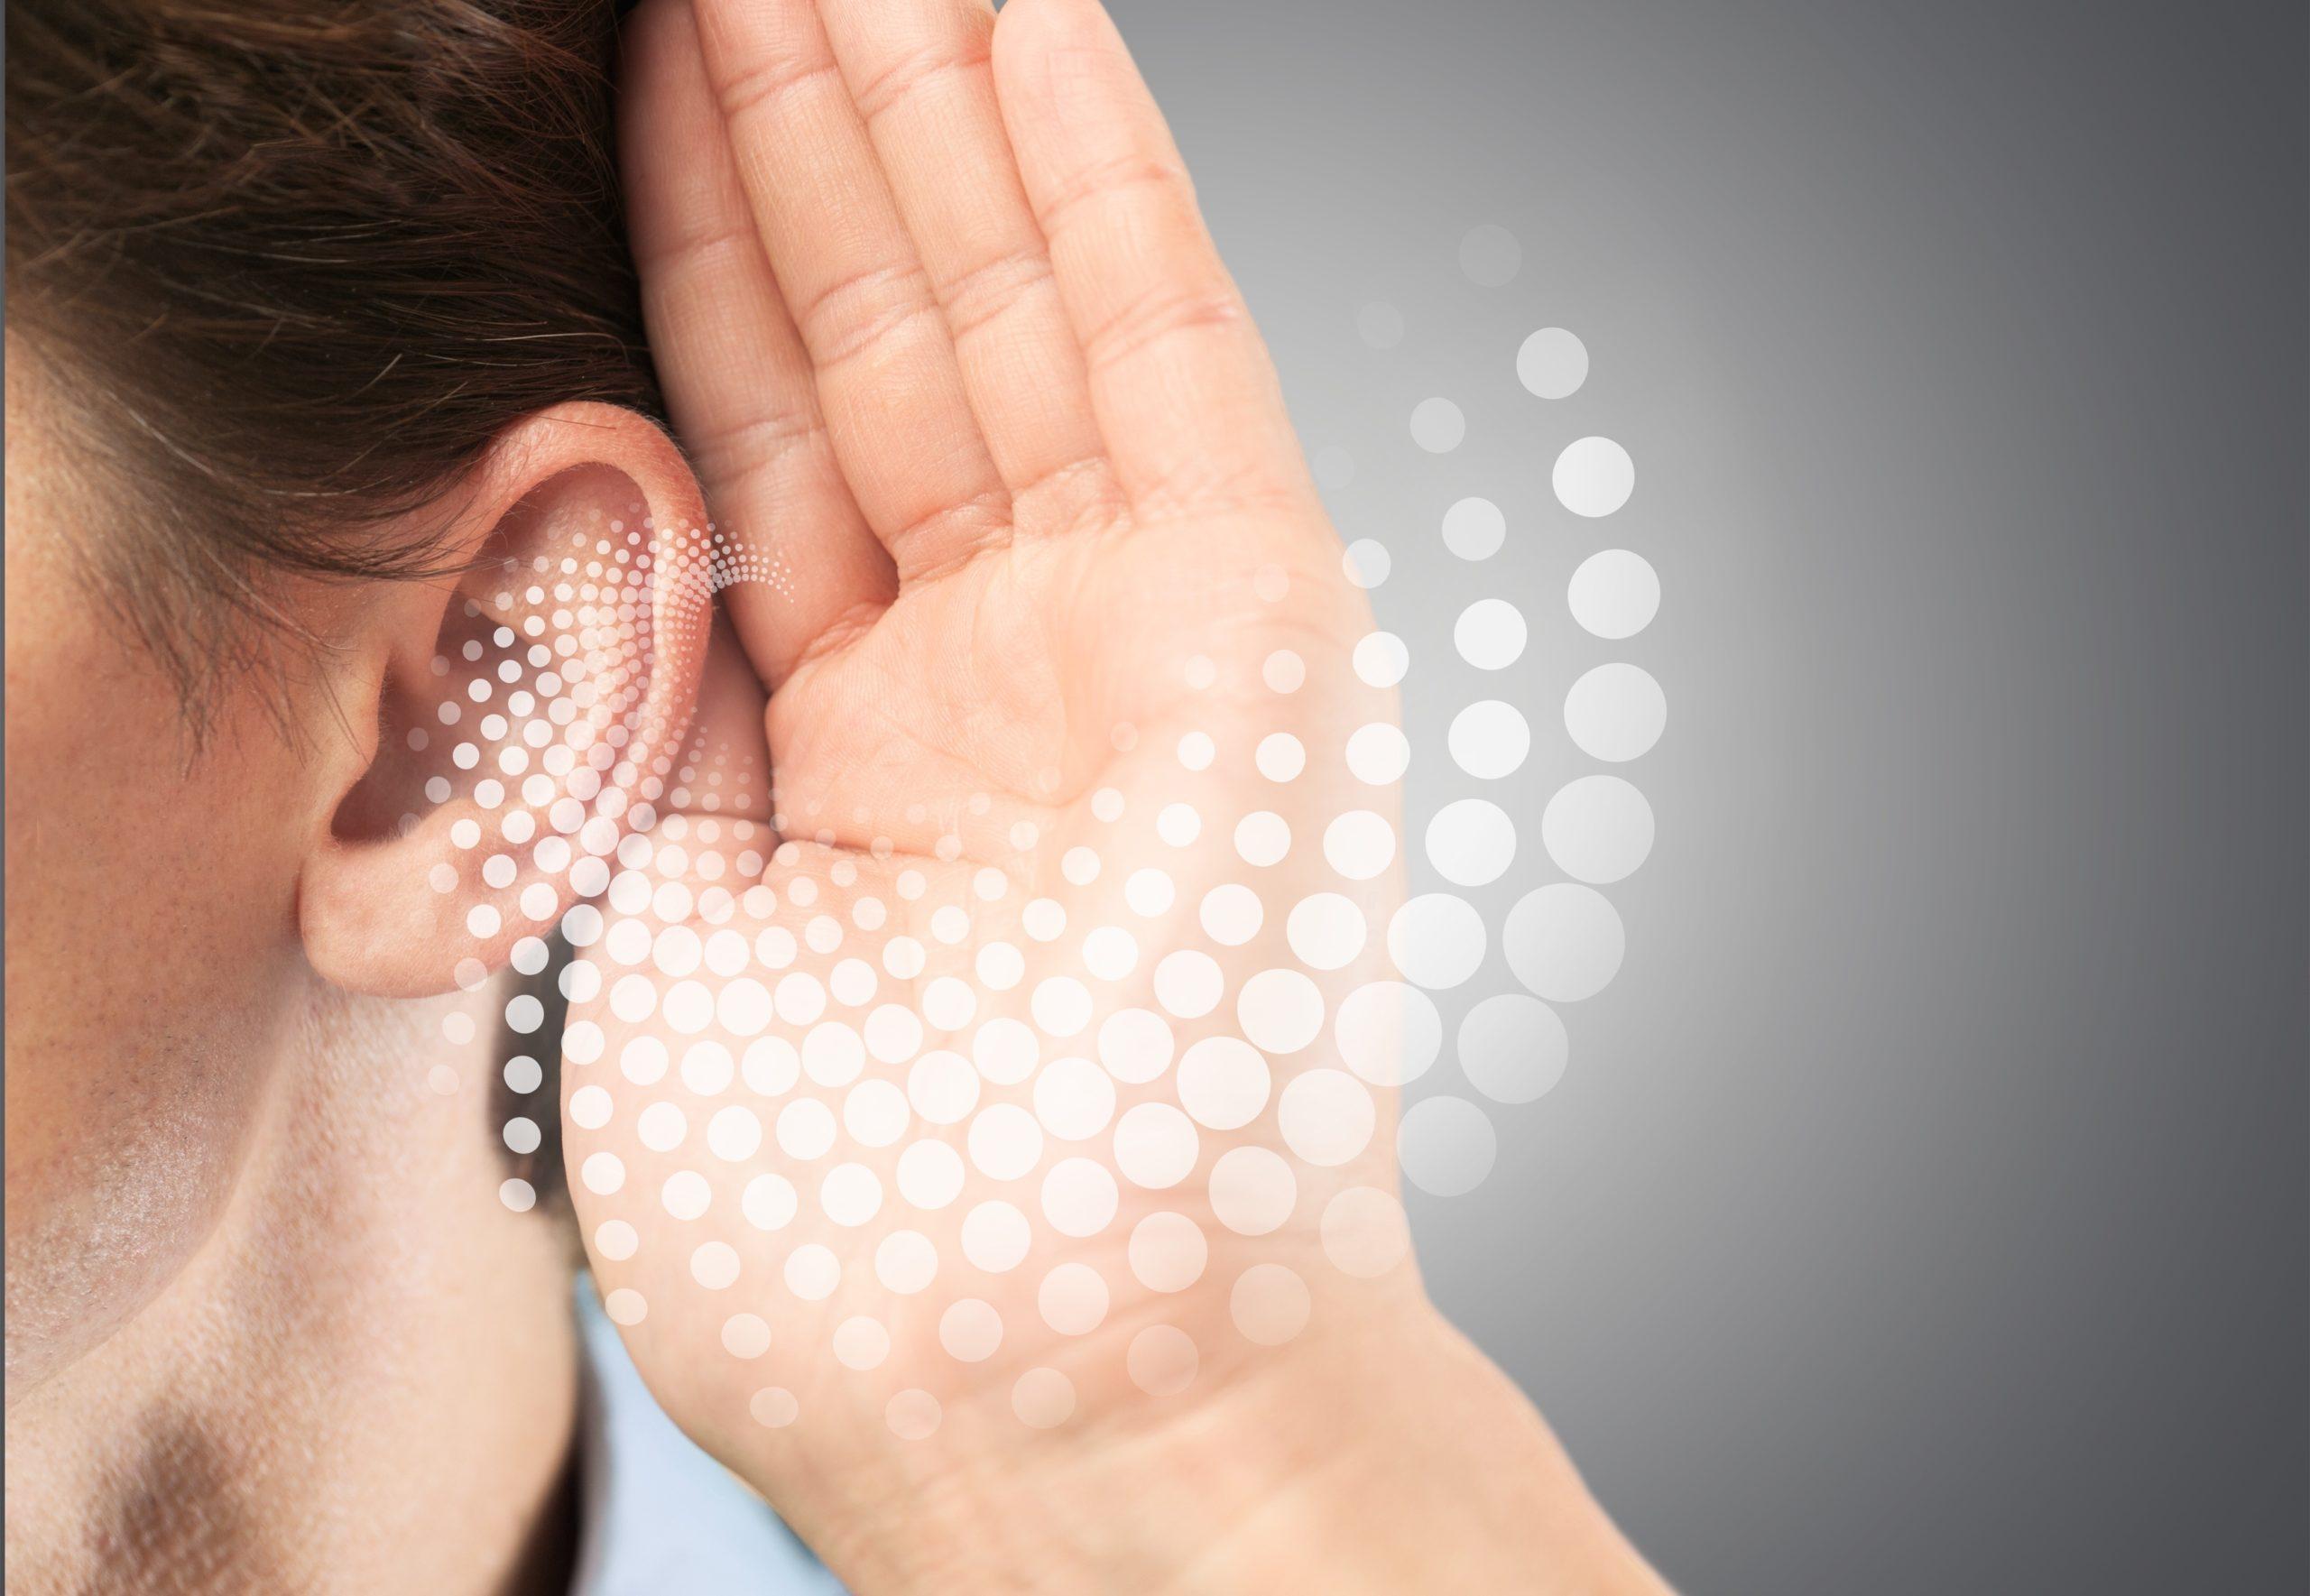 Signs That You Have Hearing Loss and Need Hearing Aids – MAE Audiological Can Help